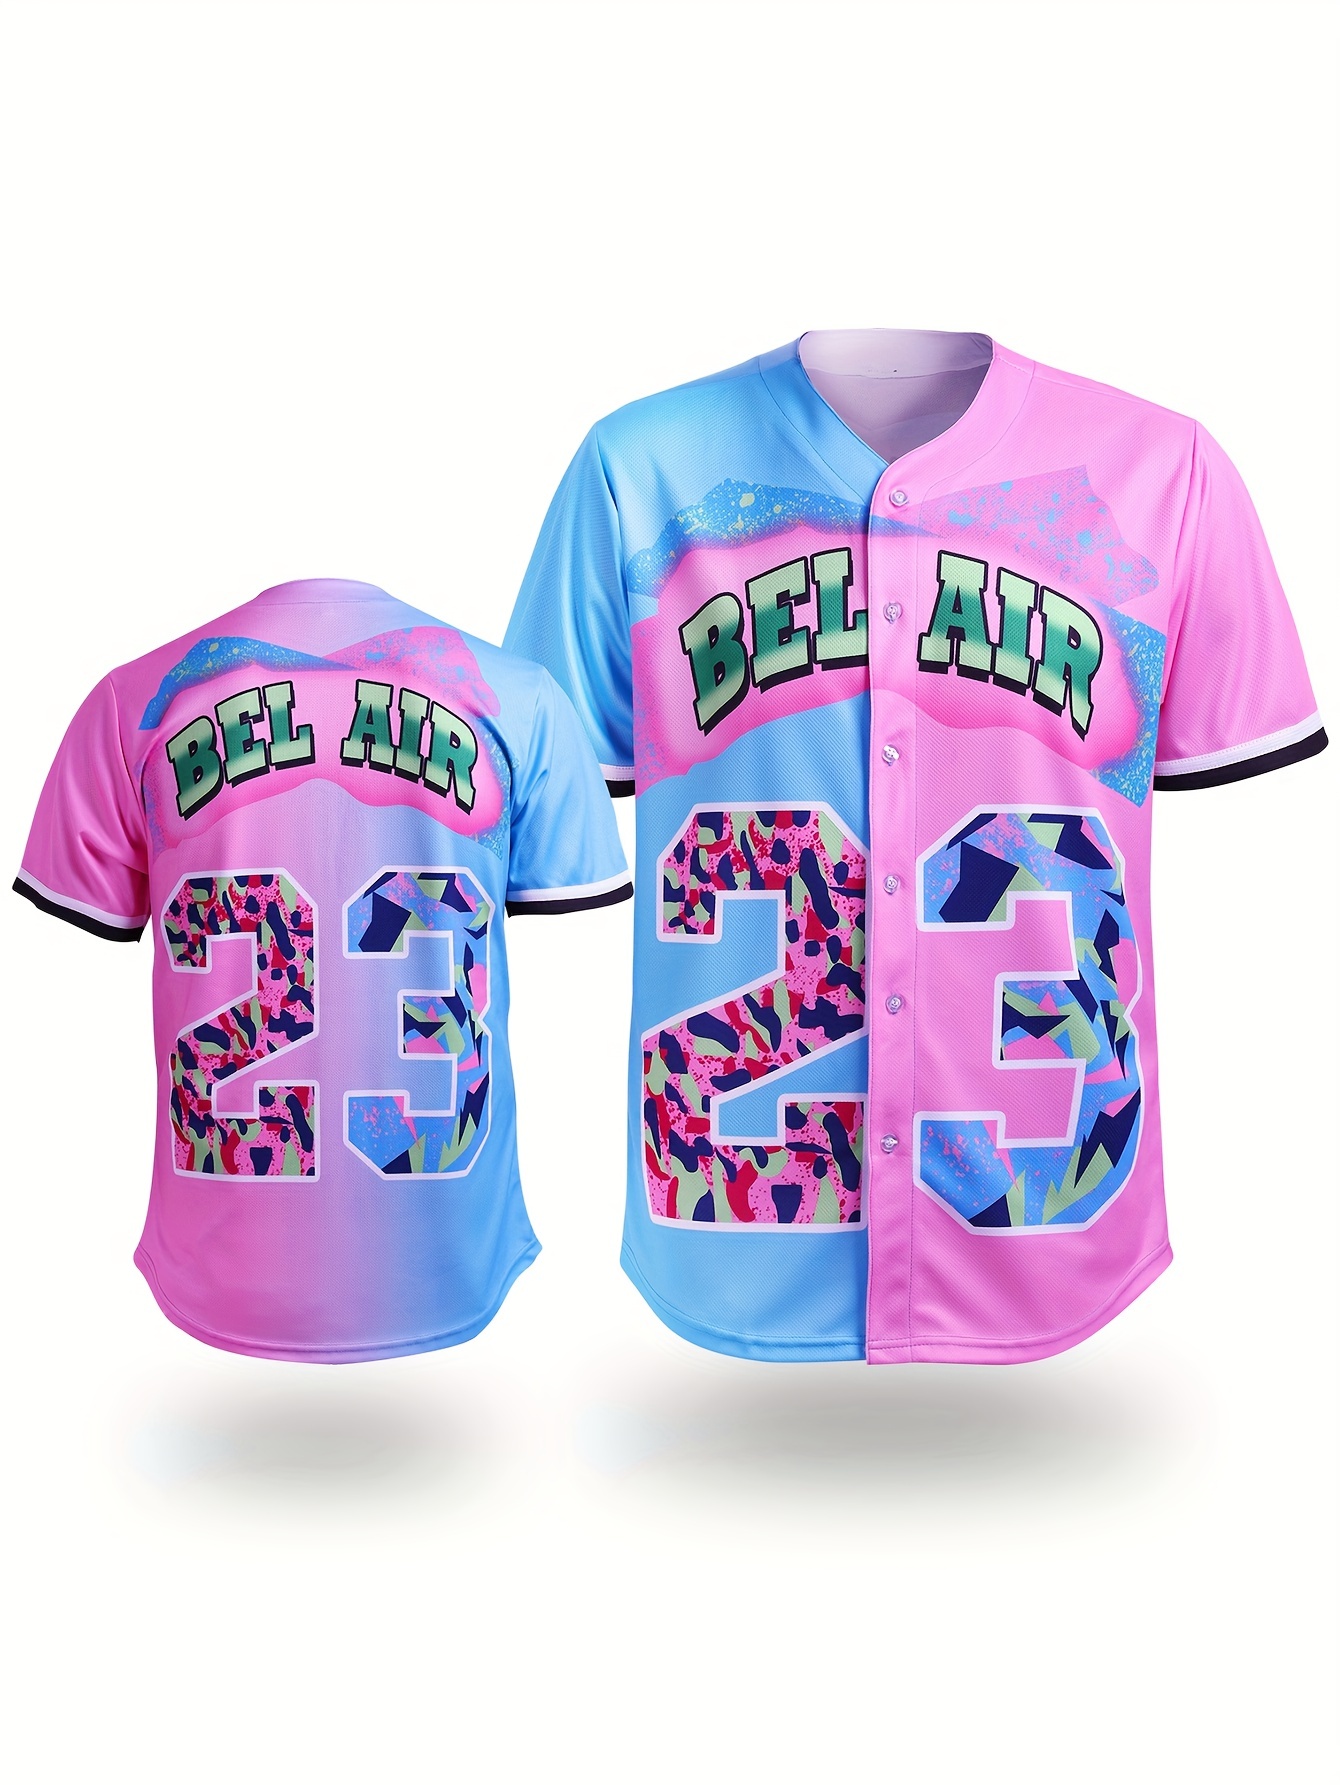 Canis Unisex 90s Theme Party Hip Hop Bel Air Baseball Uniform for Women Jersey Short Sleeve Tops for Birthday Party, Women's, Size: Large, Black